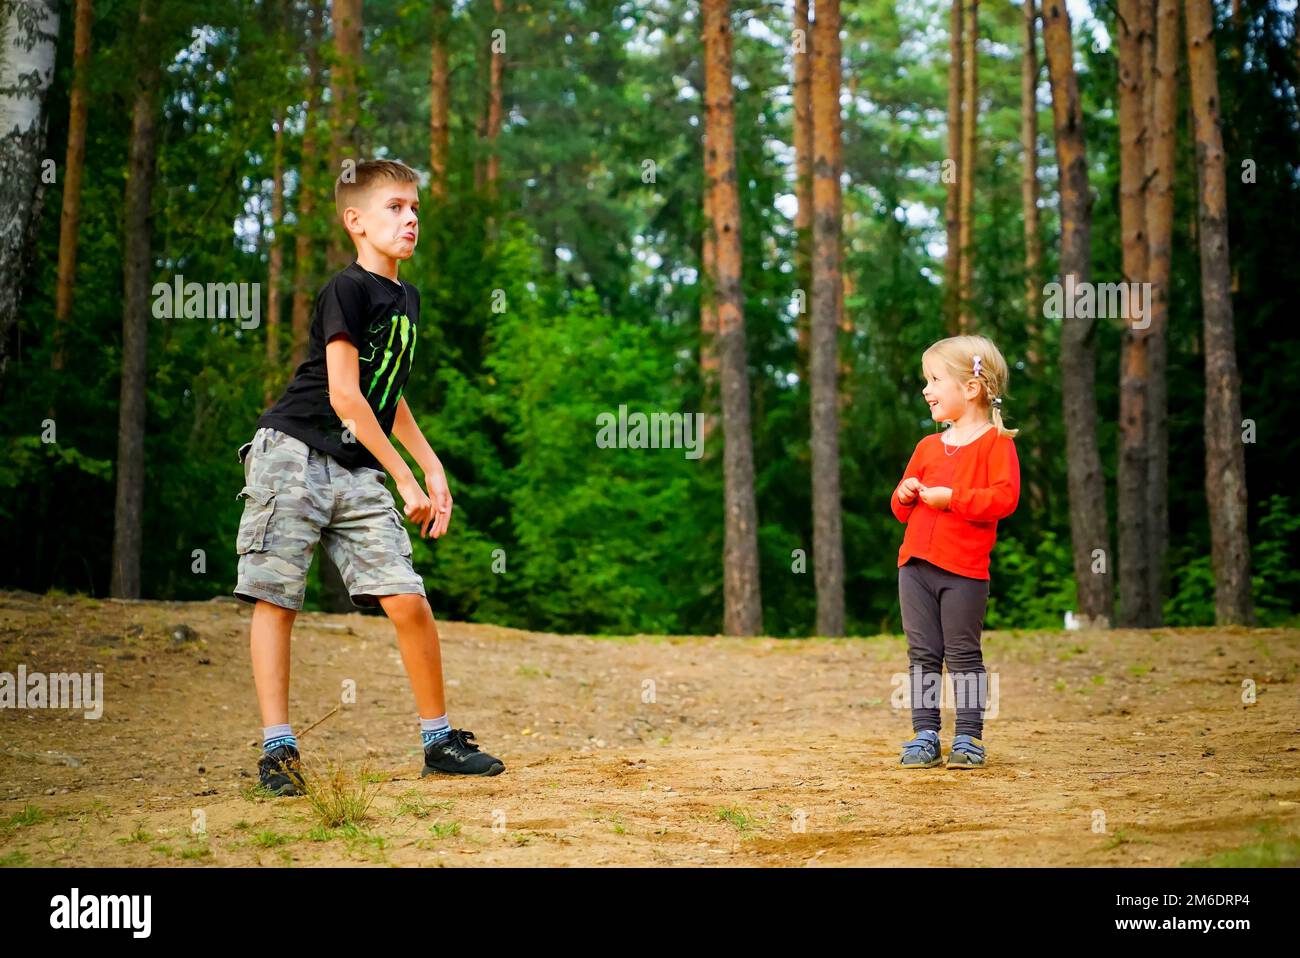 A boy and a girl are dancing merrily in a clearing in the forest . Stock Photo